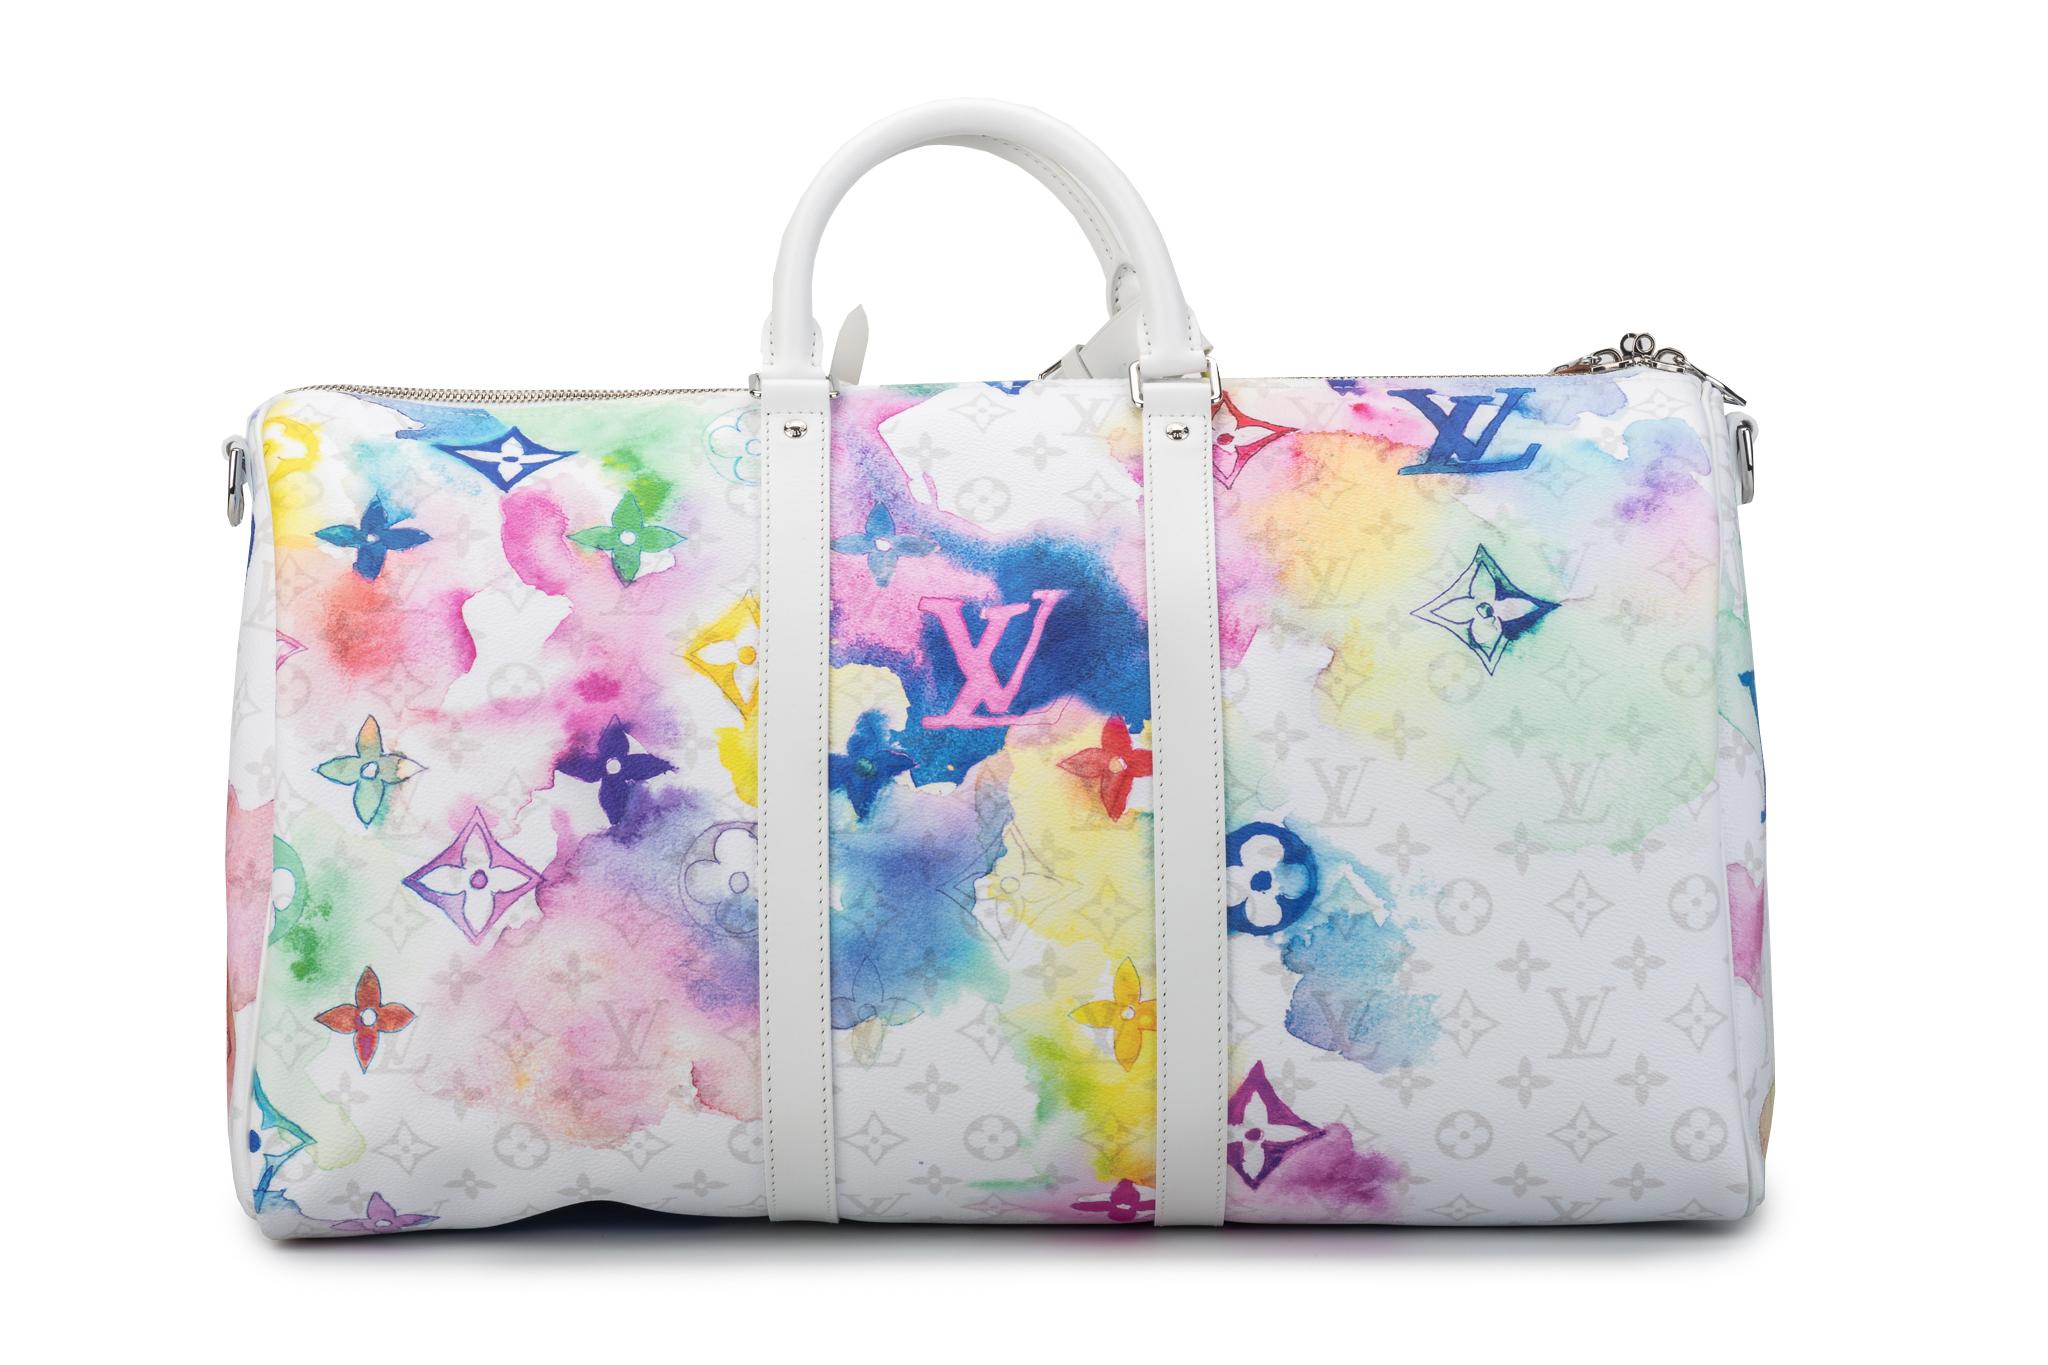 Gray New Louis Vuitton  Watercolor Keepall Bag 50 For Sale